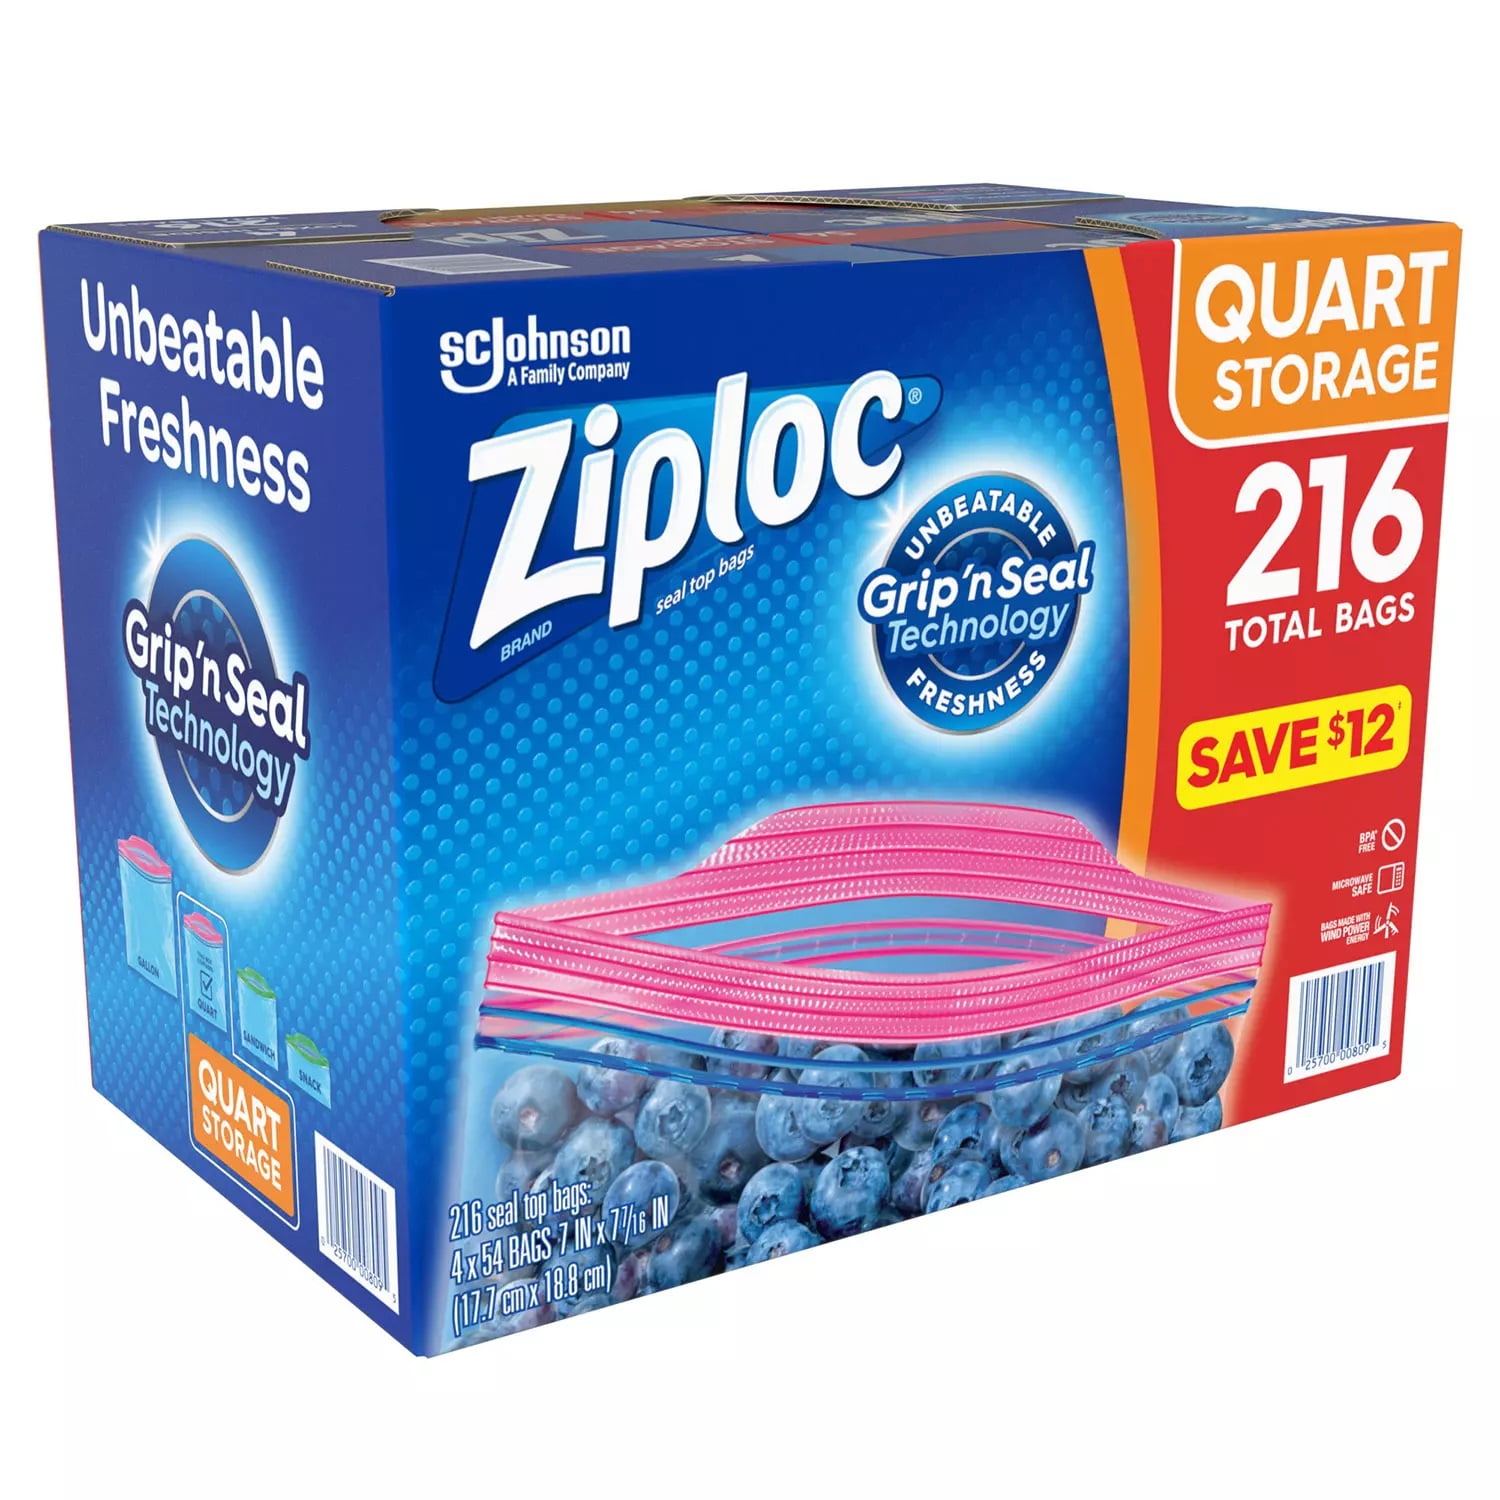 Ziploc Just Solved the Most Frustrating Problem With Its Bags